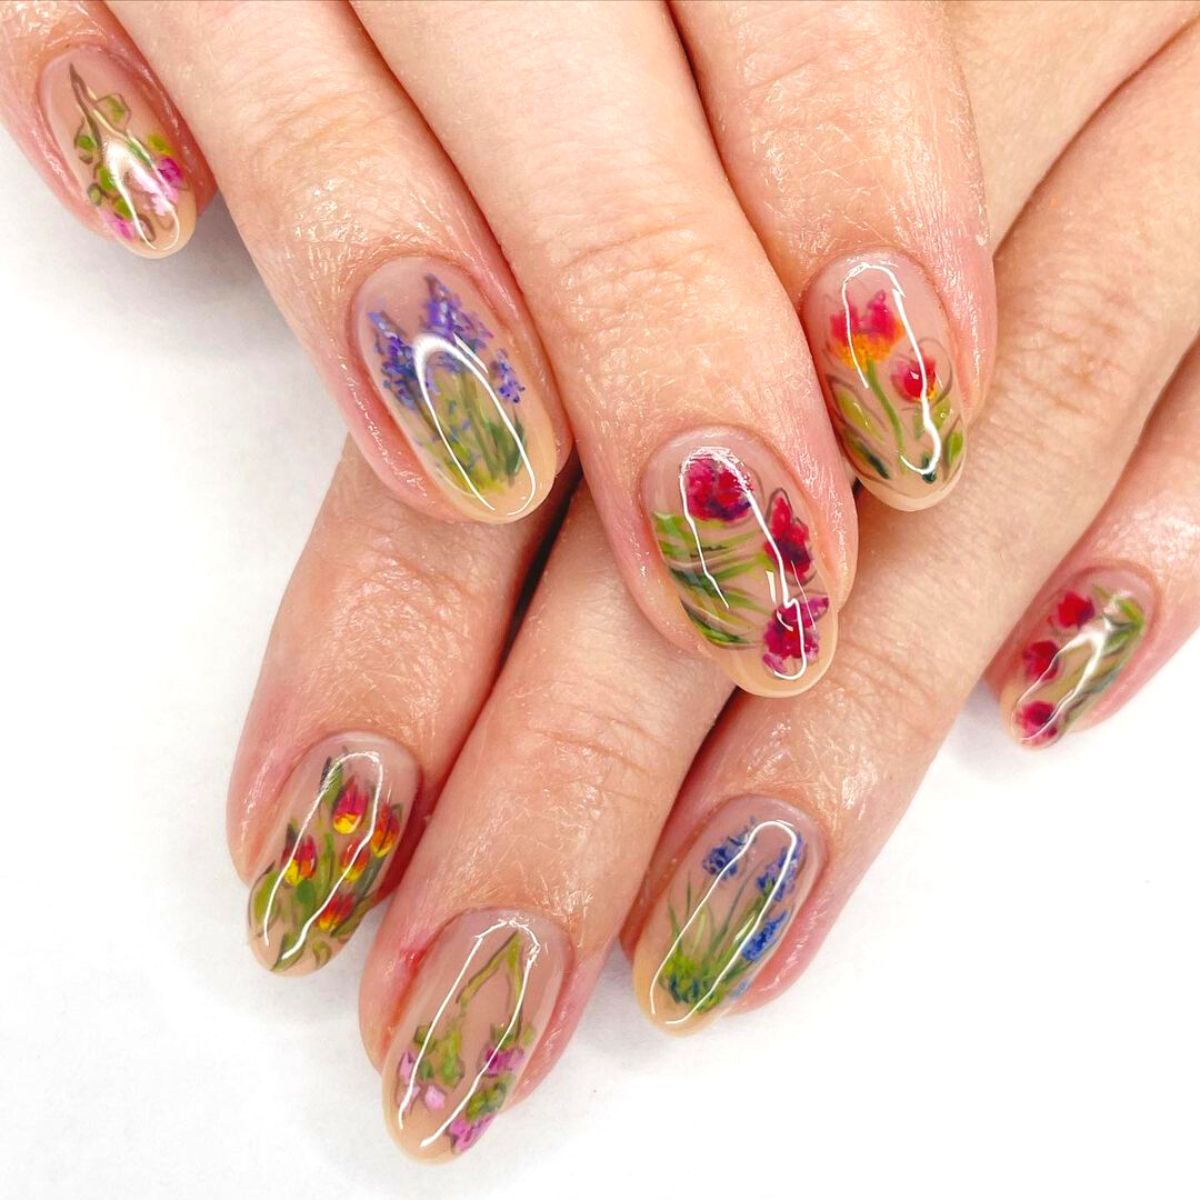 Glossy floral design on nails